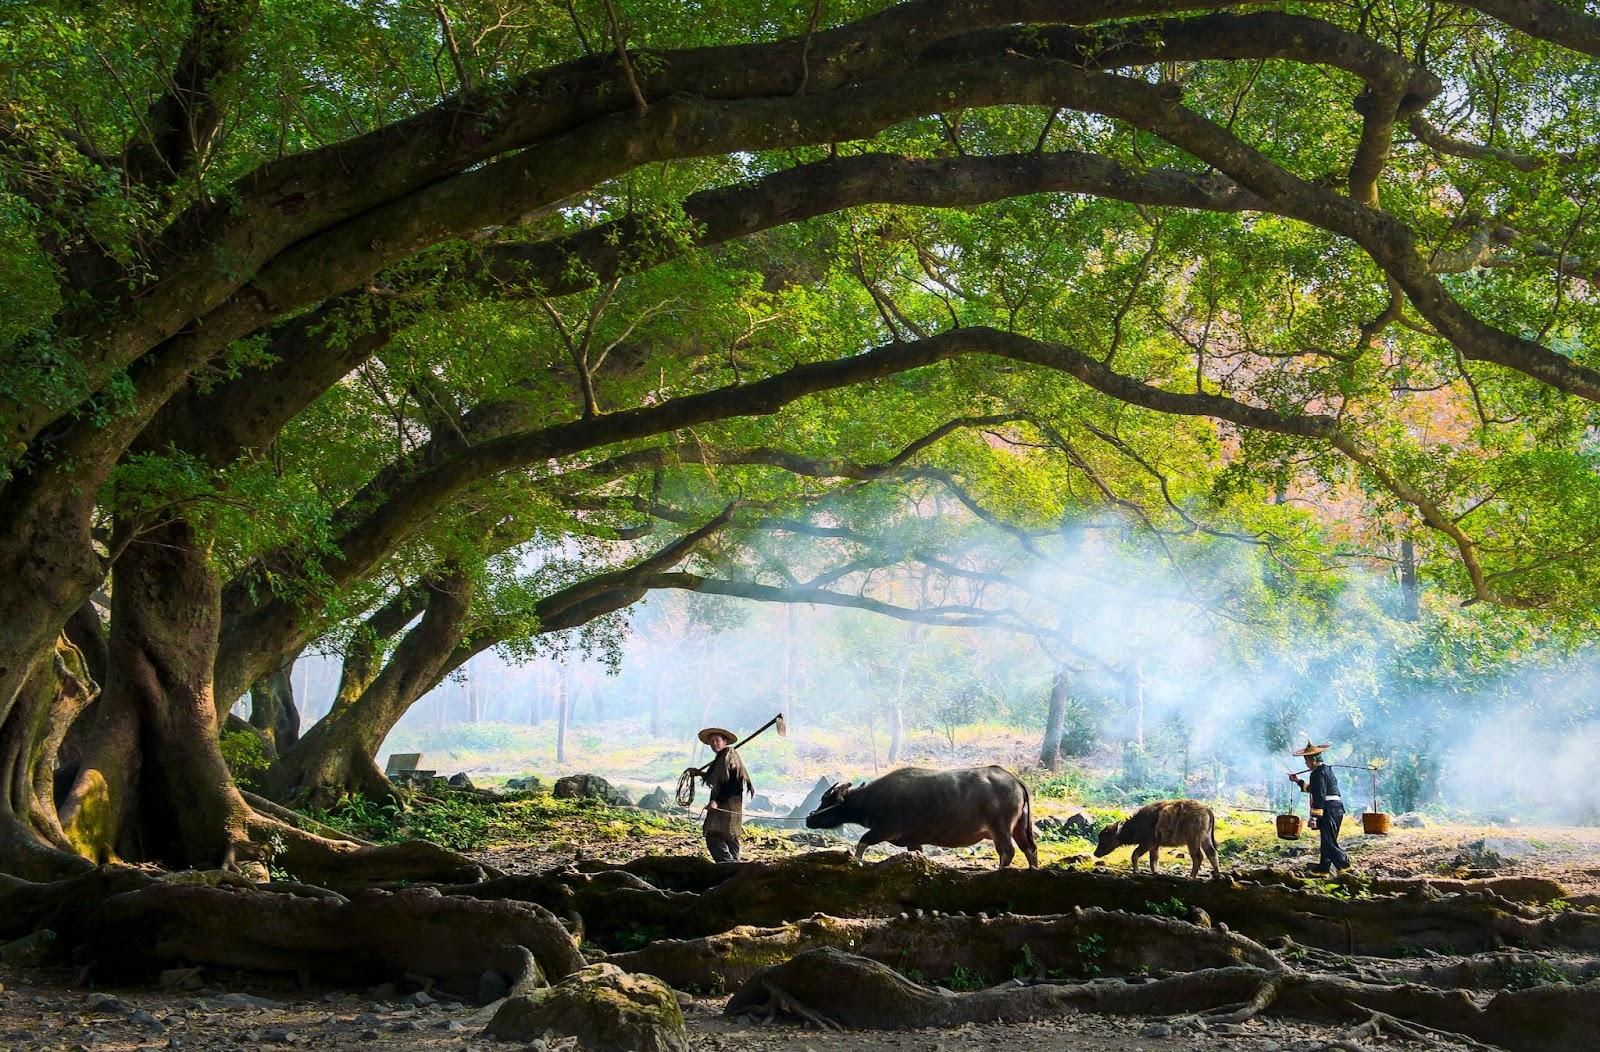 Chinese farmer tending his water buffalo in ancient woodland